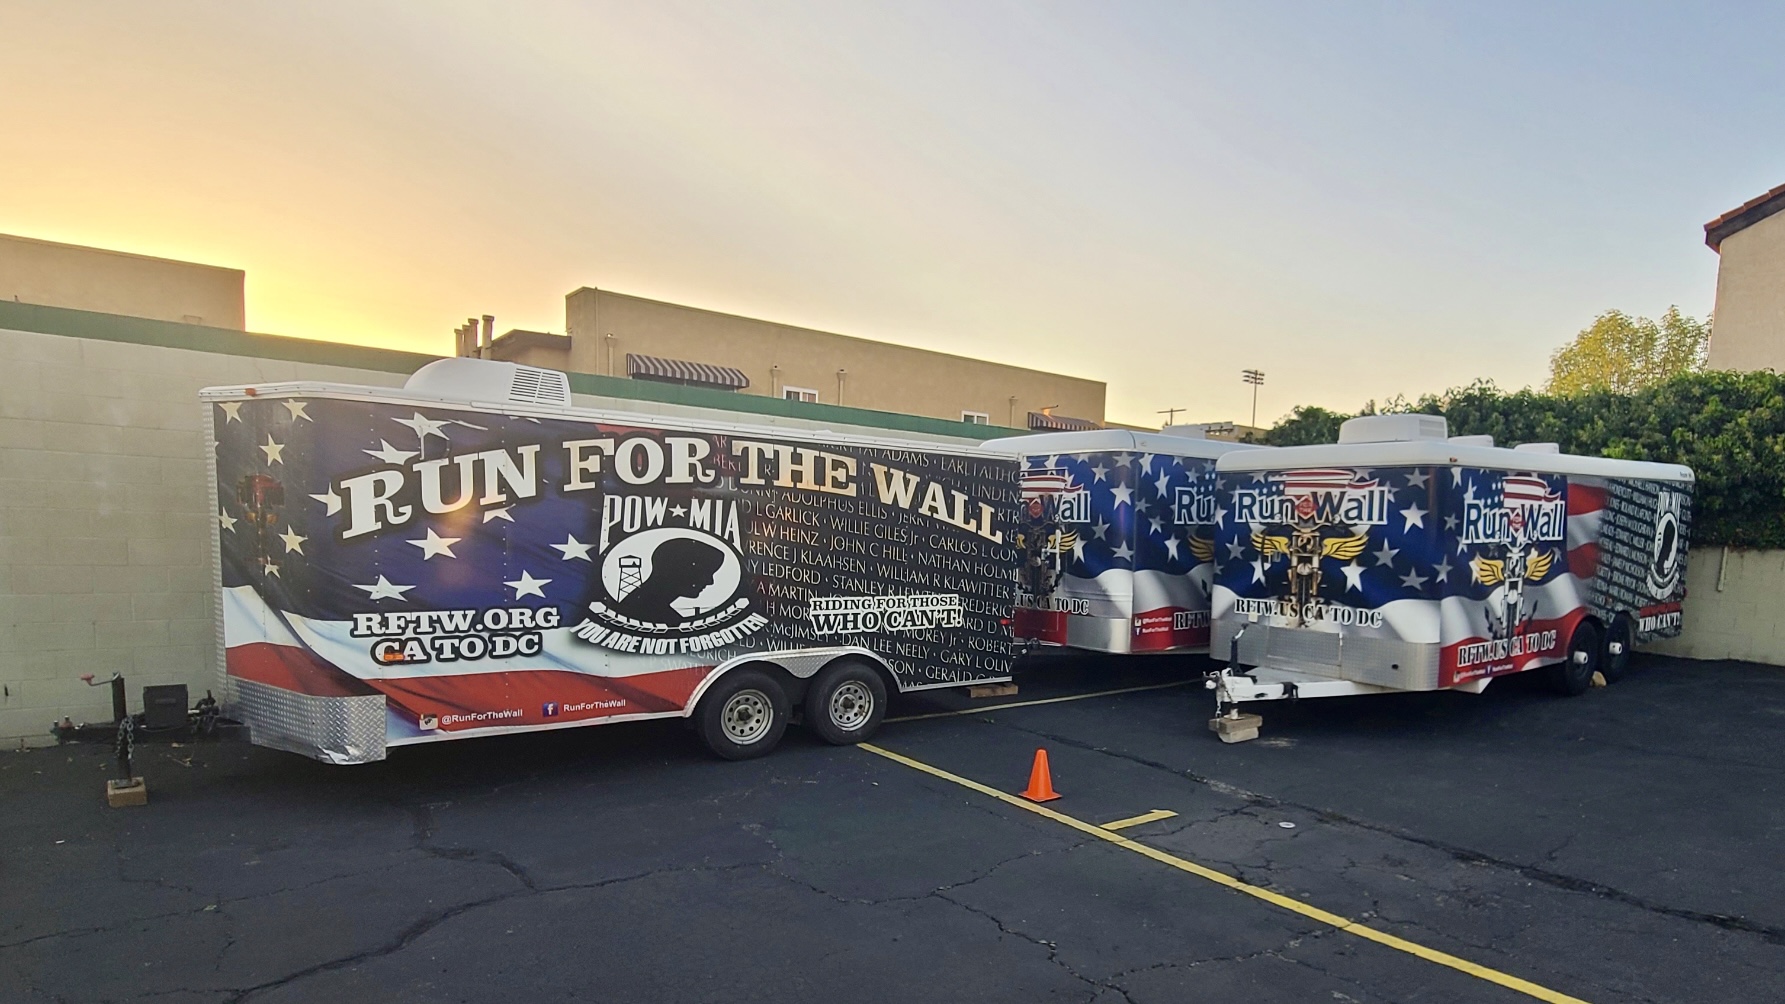 Run for the Wall® merchandise trailers